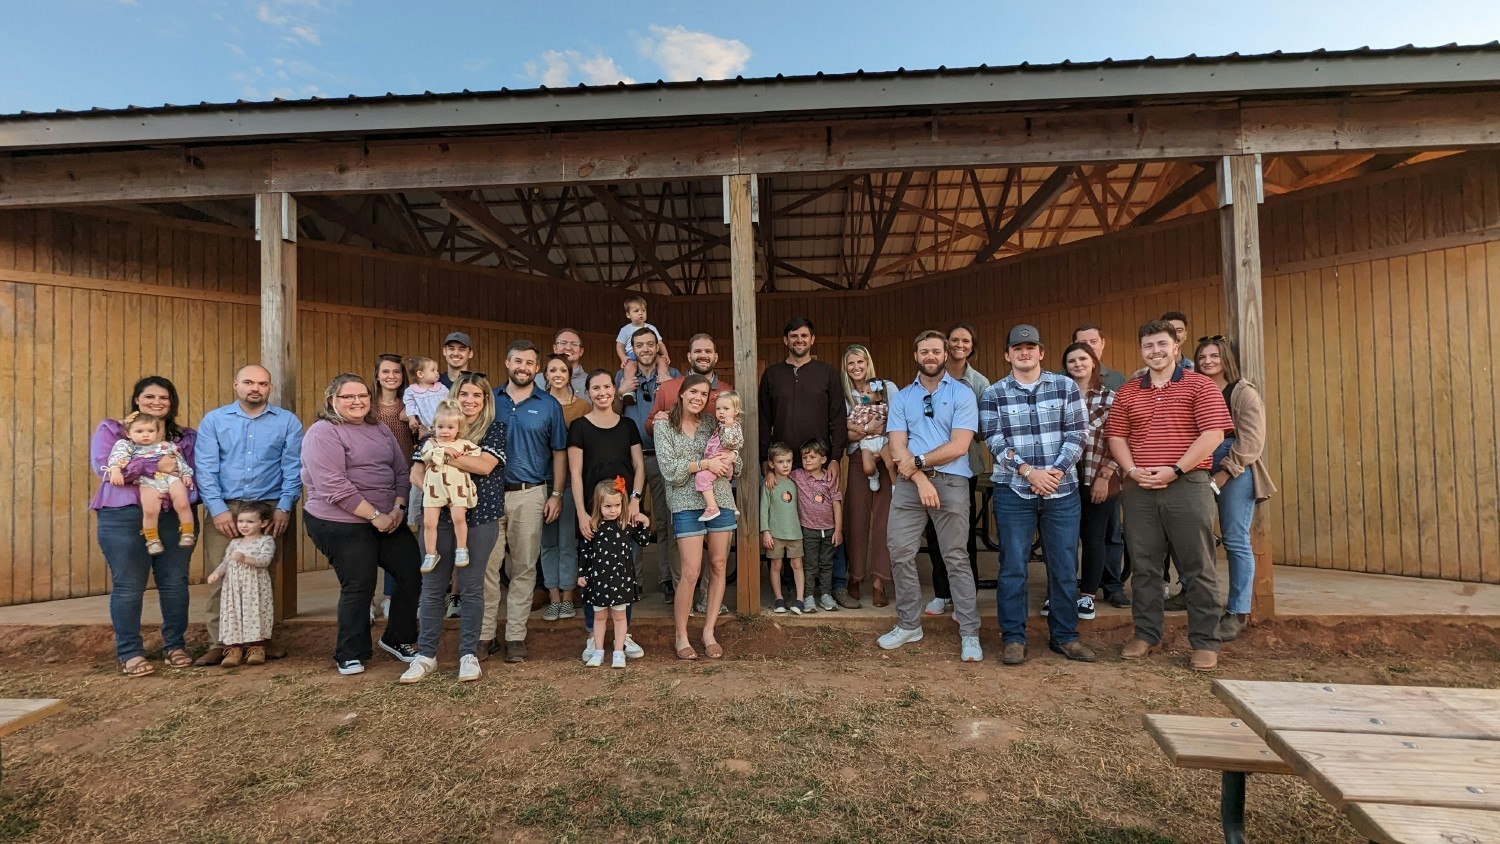 Our Outpost families enjoying an evening at Tate Farms, a local fall staple. Always great to get everyone together!